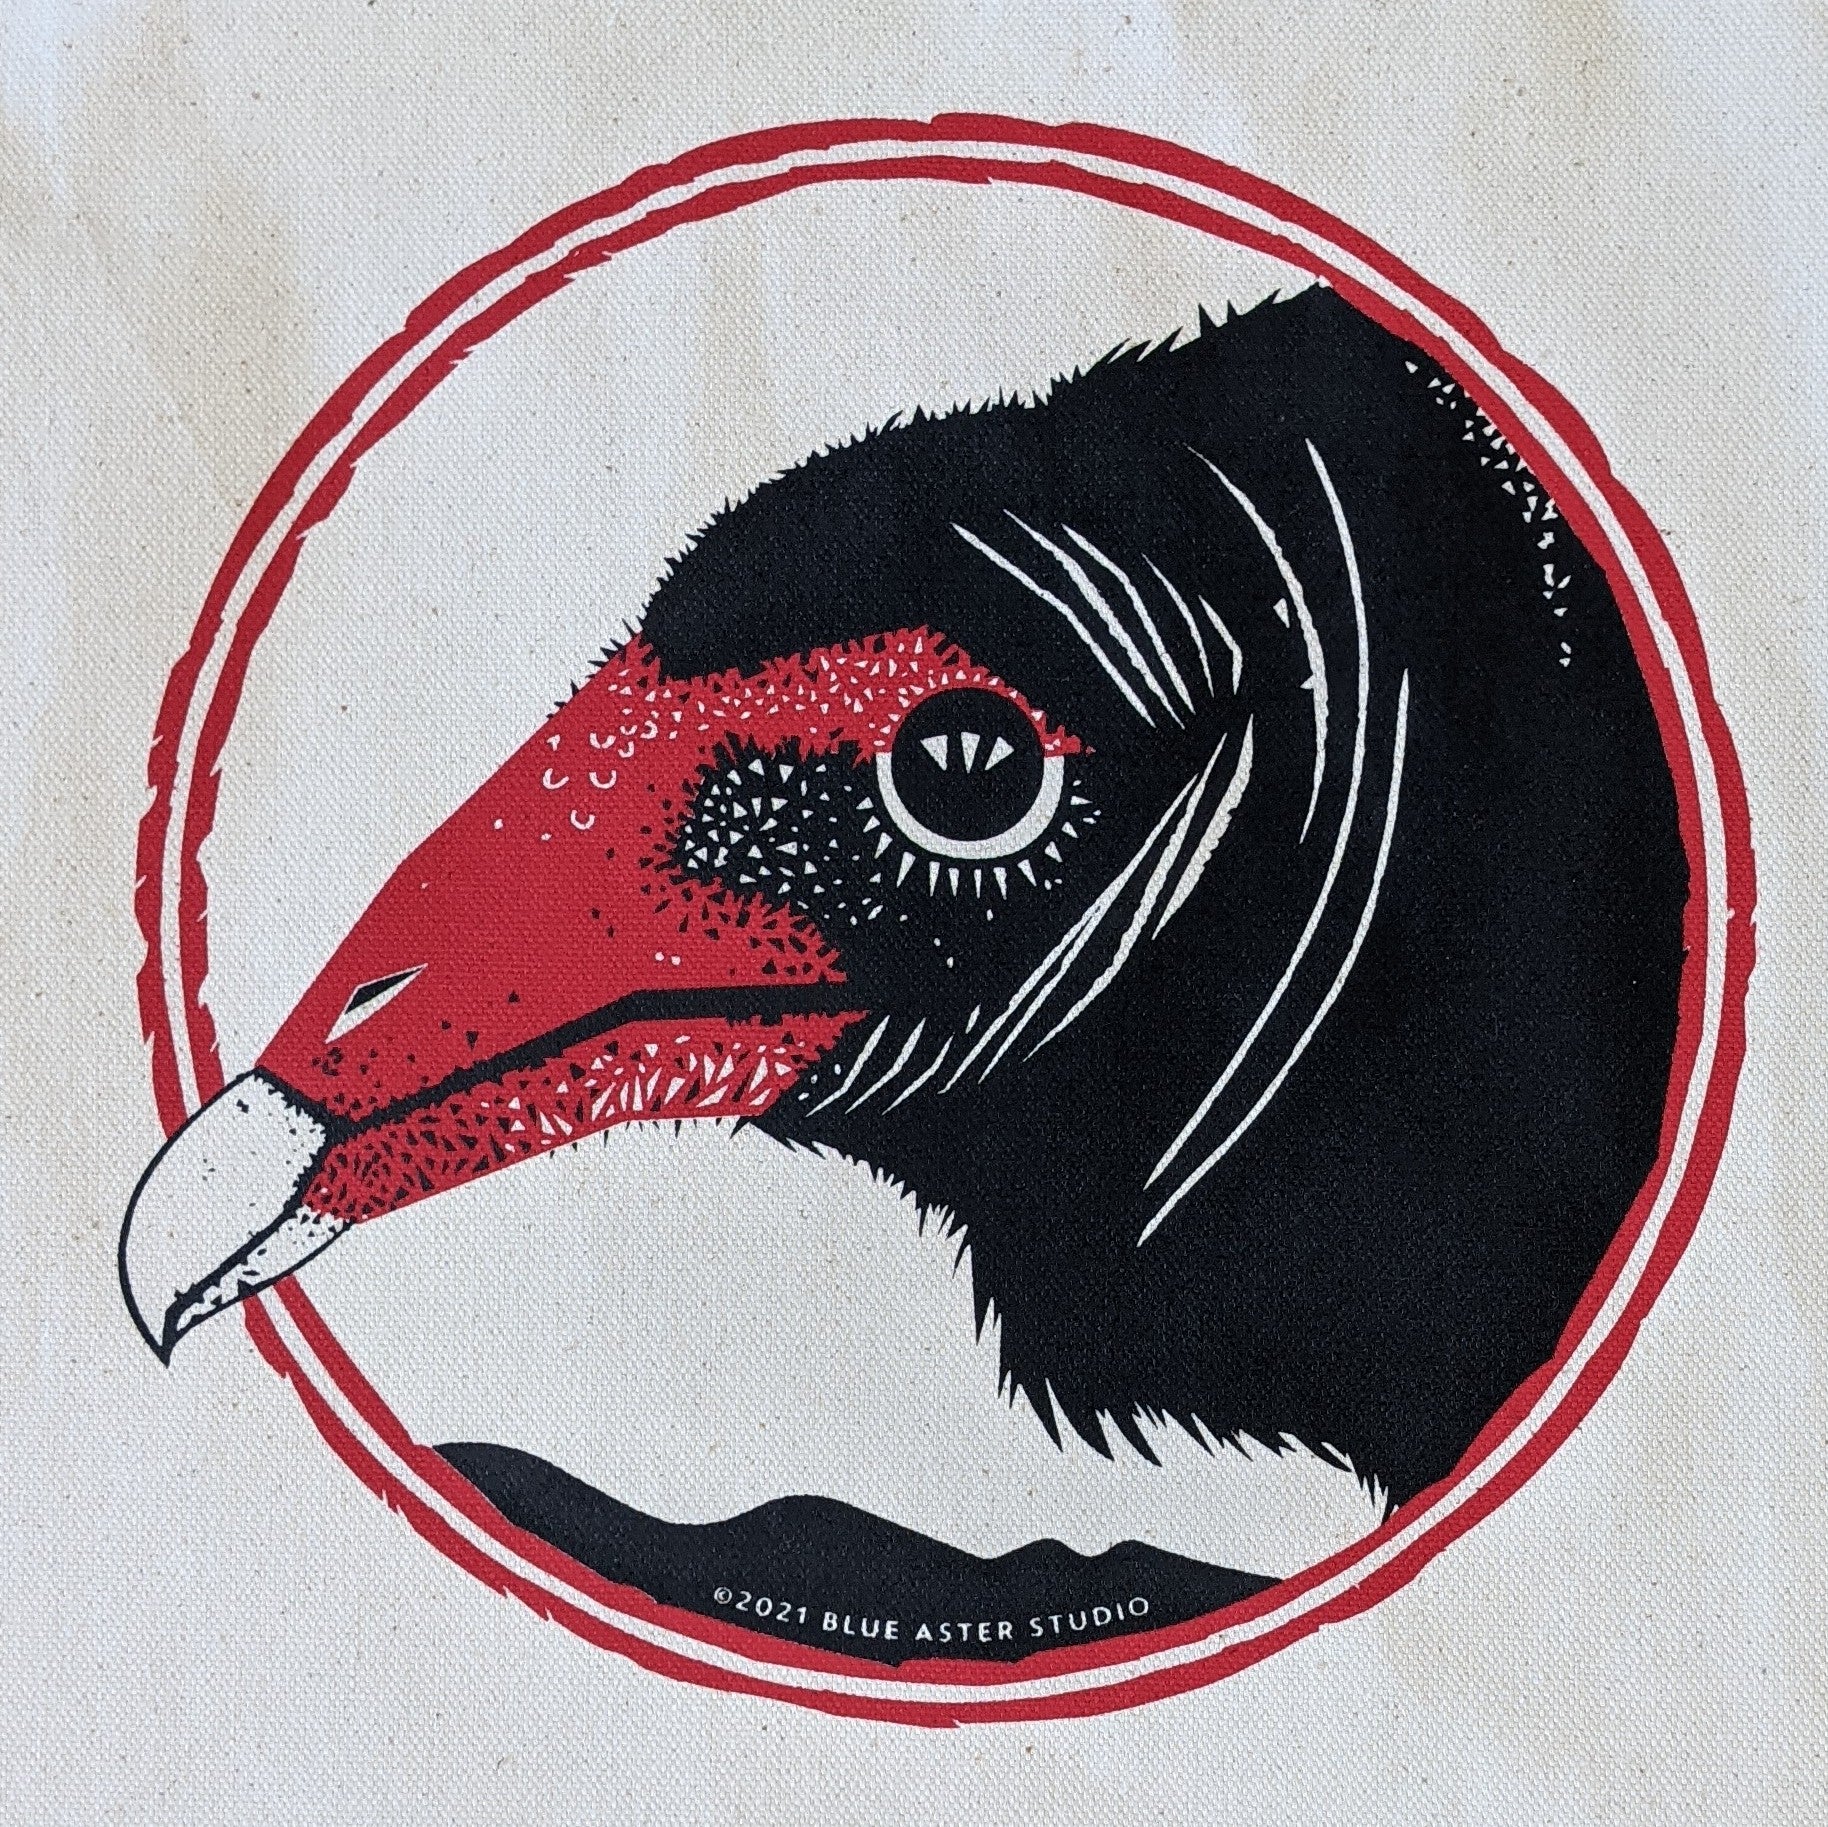 A close-up of the turkey vulture screen printed design on the tote bag.